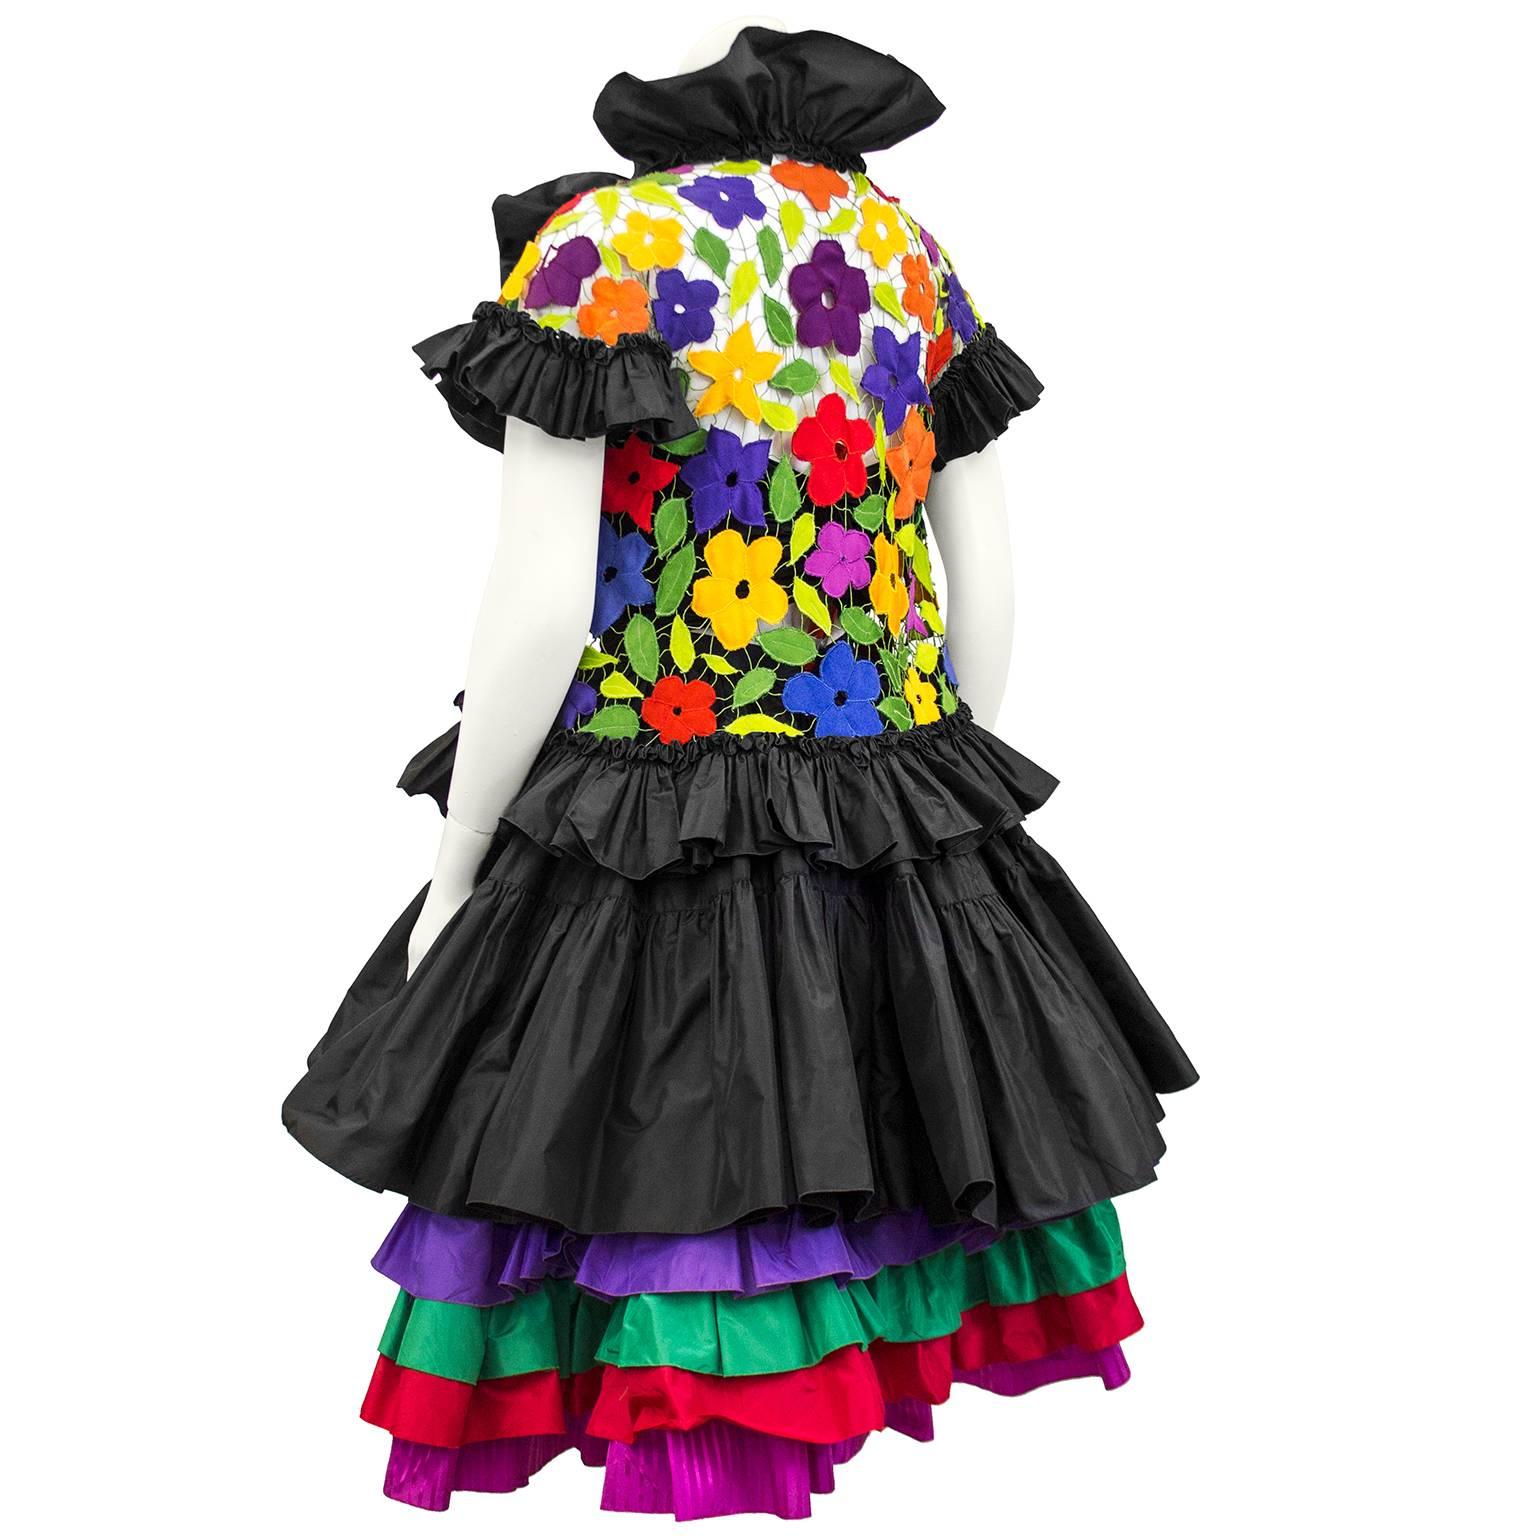 1980s 3 pc ensemble by Canadian demi couture designer Maggie Reeves. Black silk taffeta bustier, taffeta skirt with multi colour layers and macrame floral multi colour jacket with black taffeta trim. Can be worn all together for a fab evening look